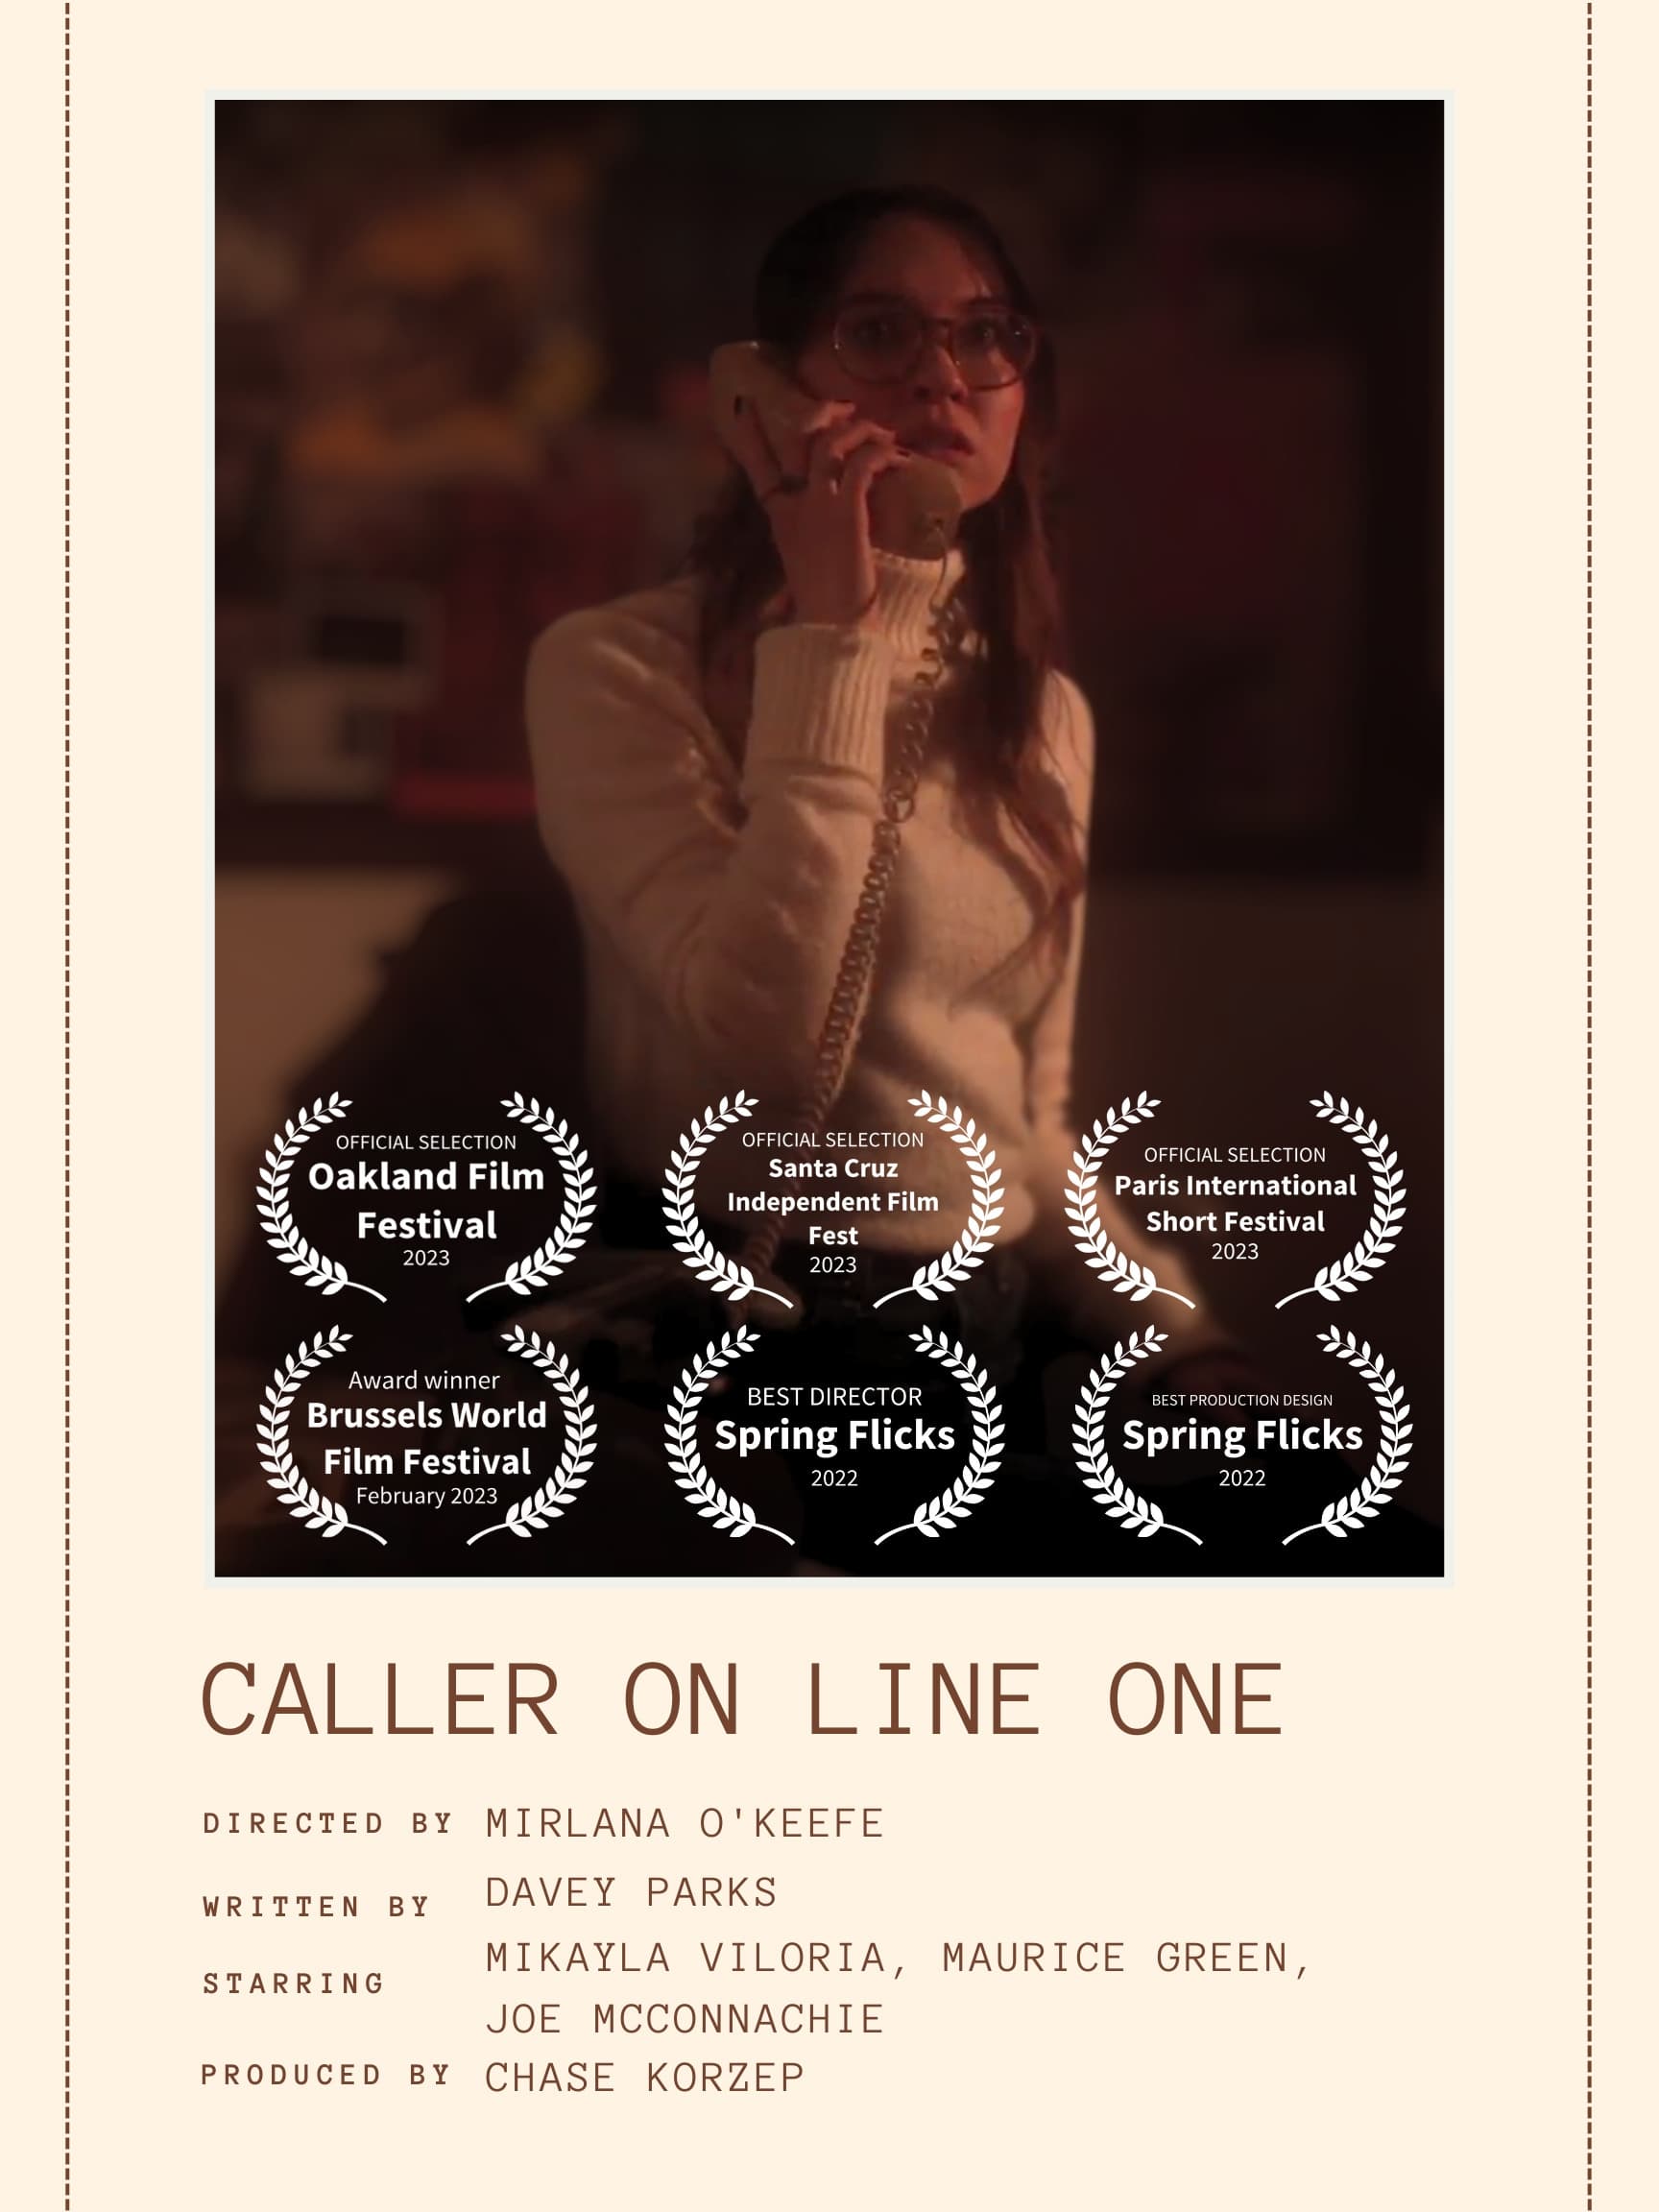 Caller on Line One